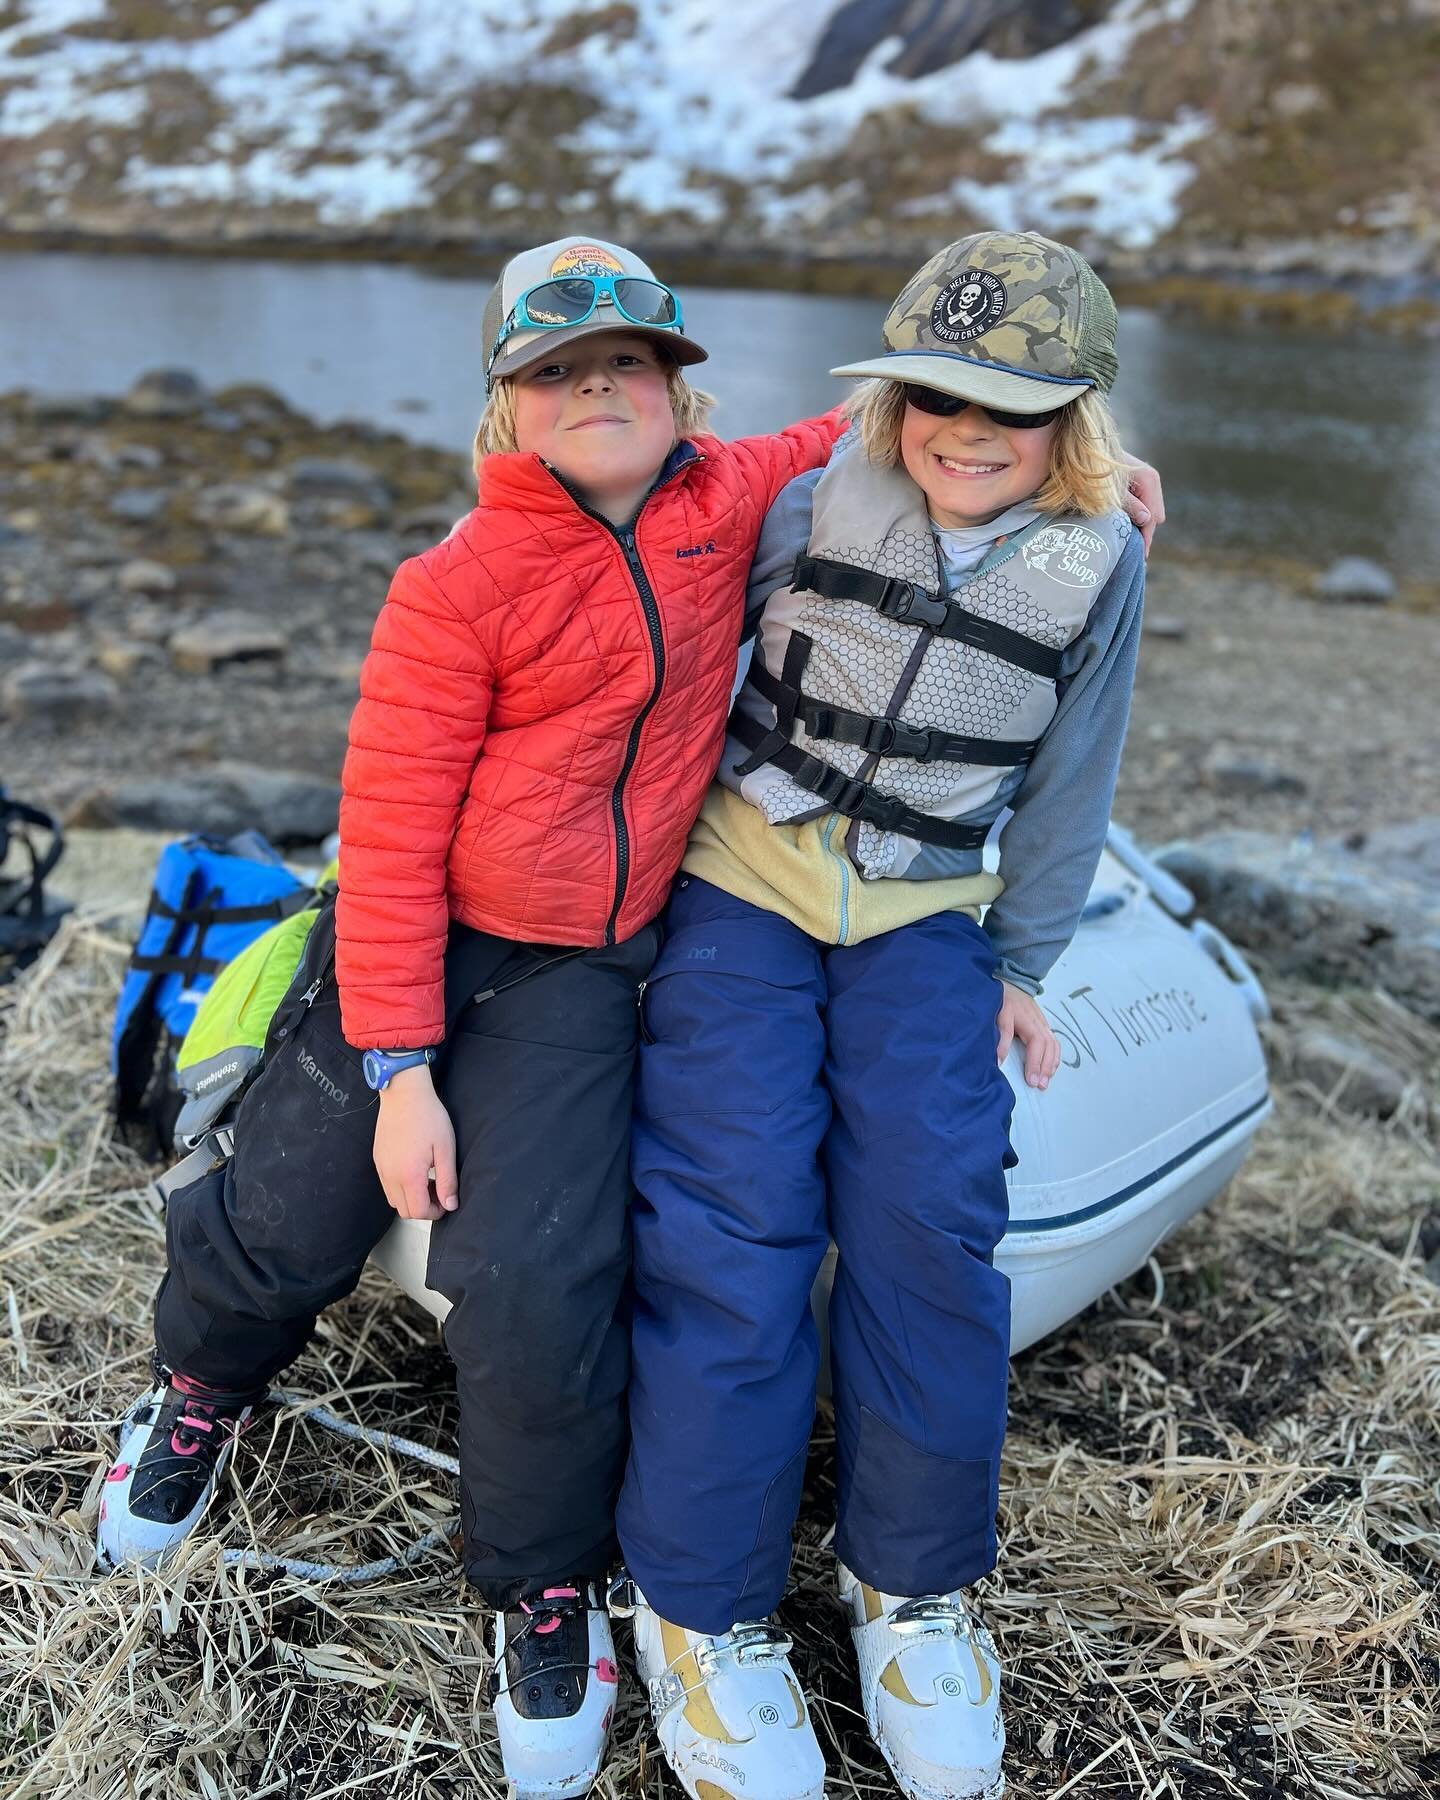 Spring ski touring with these two rascals (ages 7 &amp; 9) demands Herculean patience and a solid sense of humor but they&rsquo;re rockin&rsquo; it. Scroll over for a few recent bloopers.